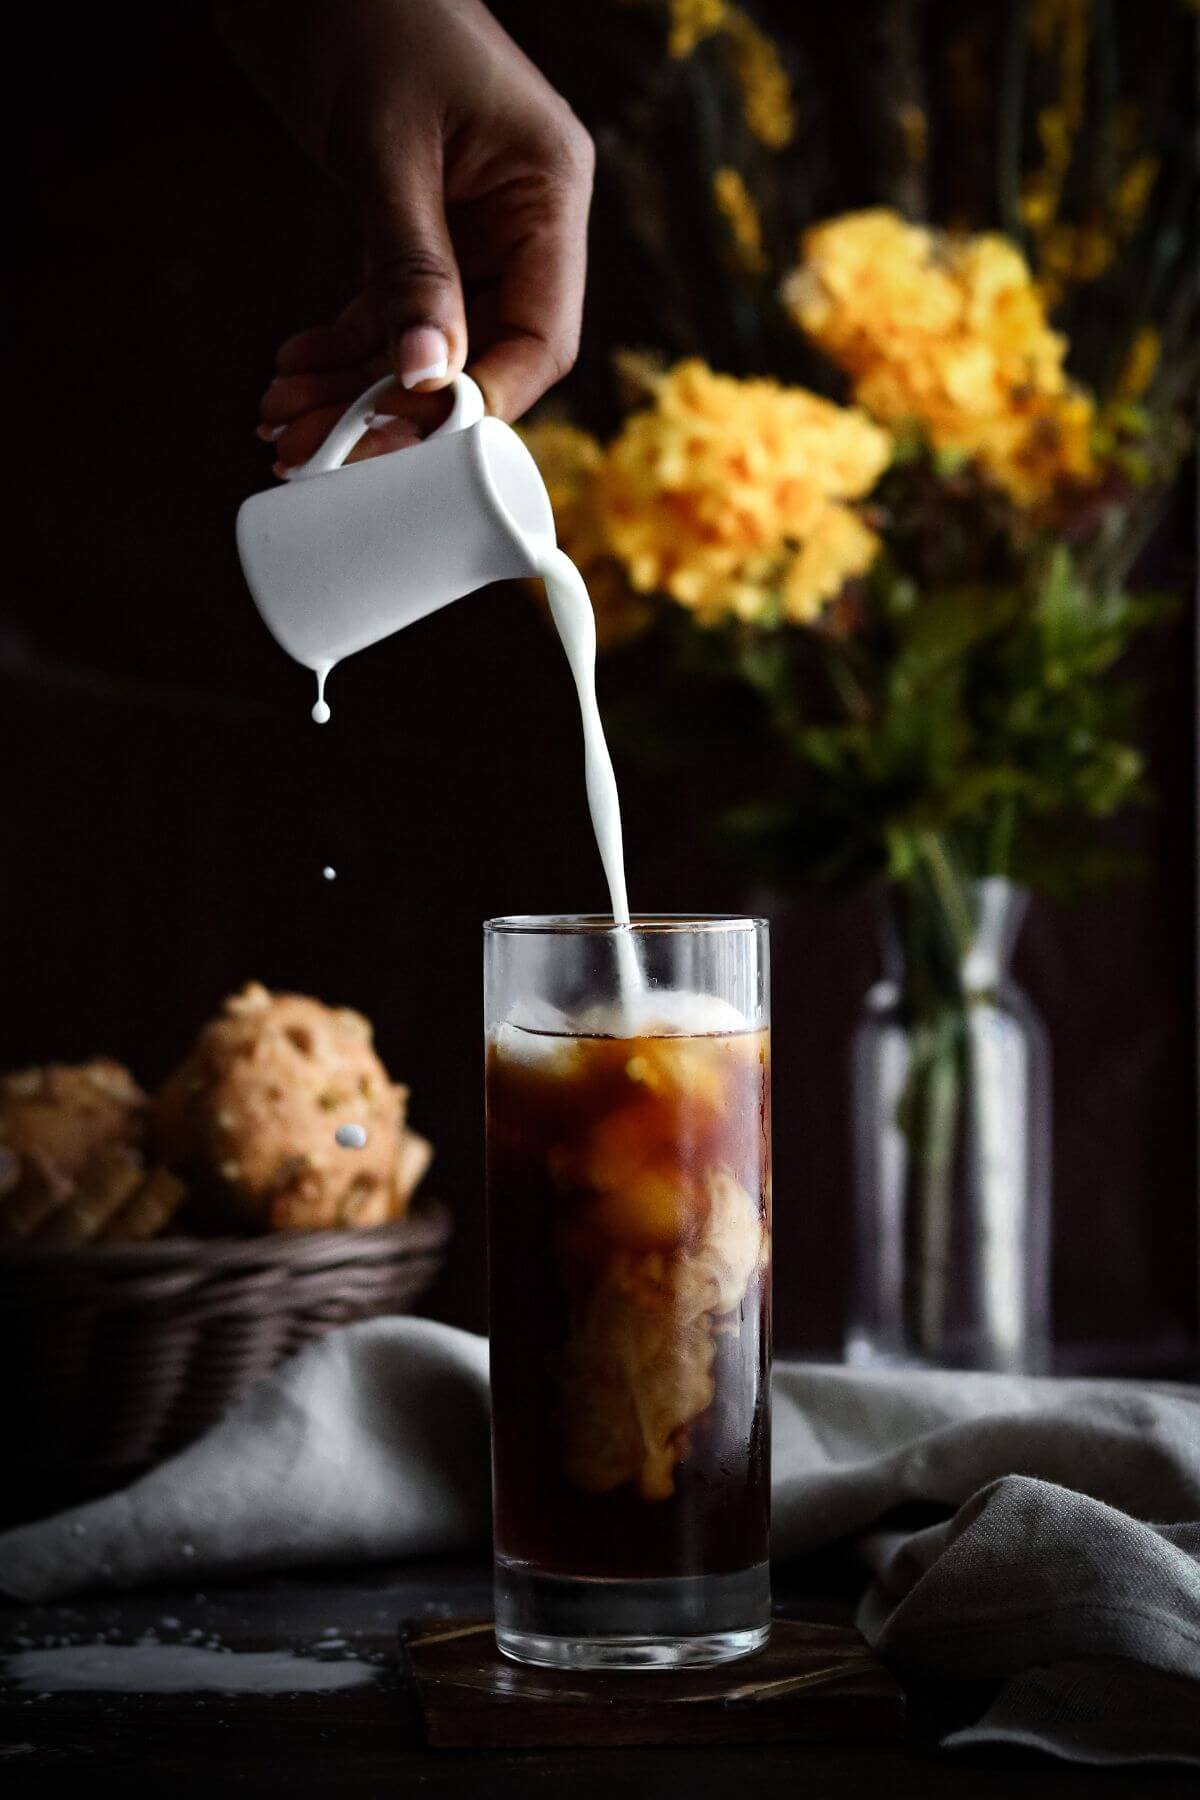 Pouring cream into a glass of cold brew coffee.